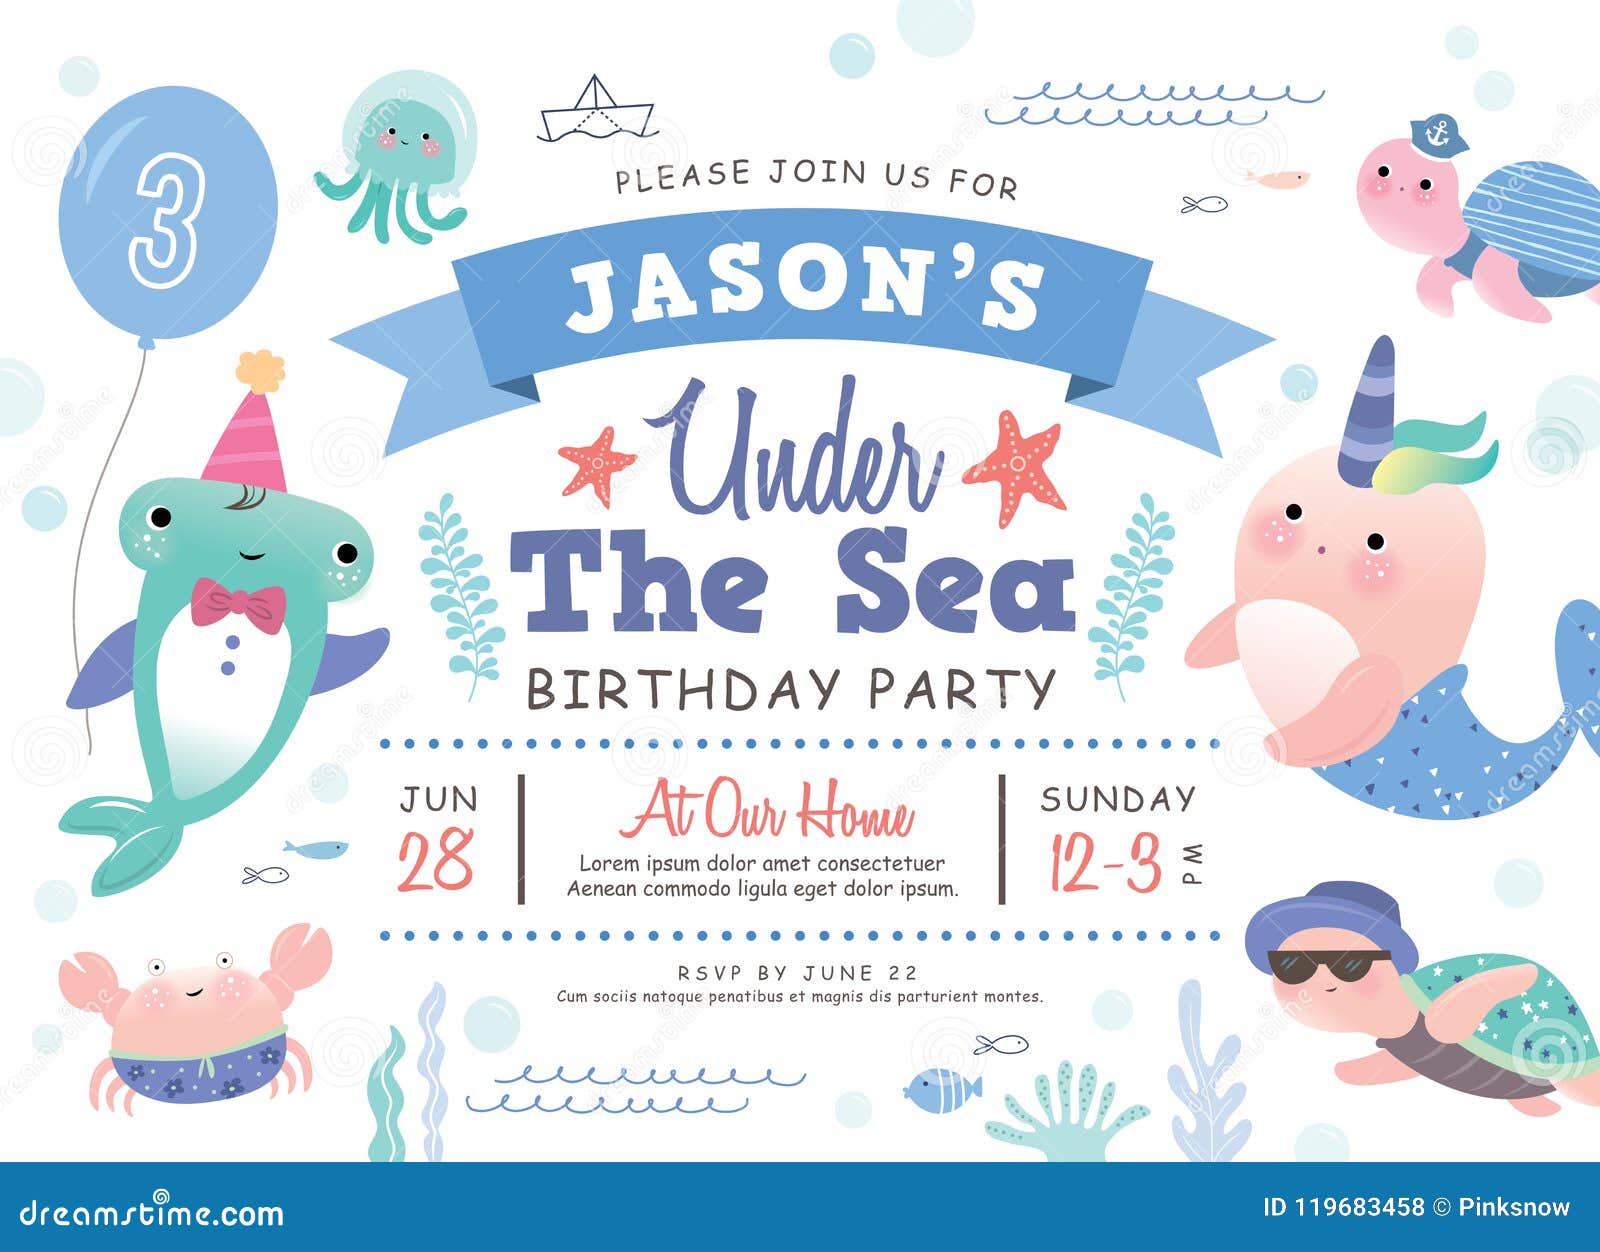 Kids Birthday Party Invitation Card Stock Vector Illustration Of Fish Party